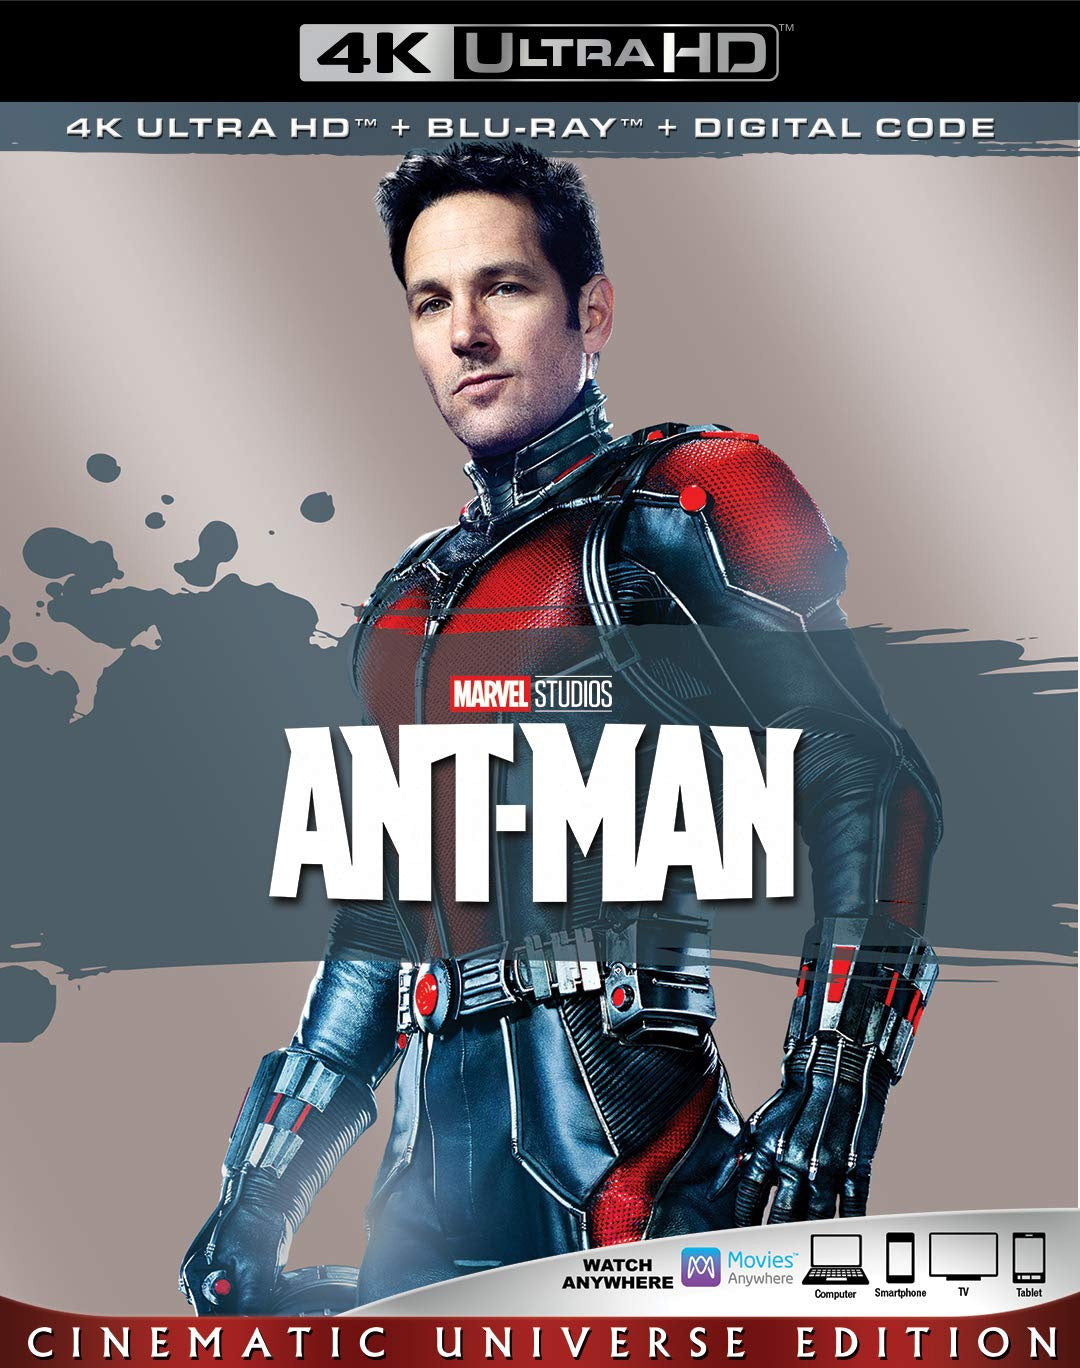 Ant-Man (2015) Vudu or Movies Anywhere 4K redemption only